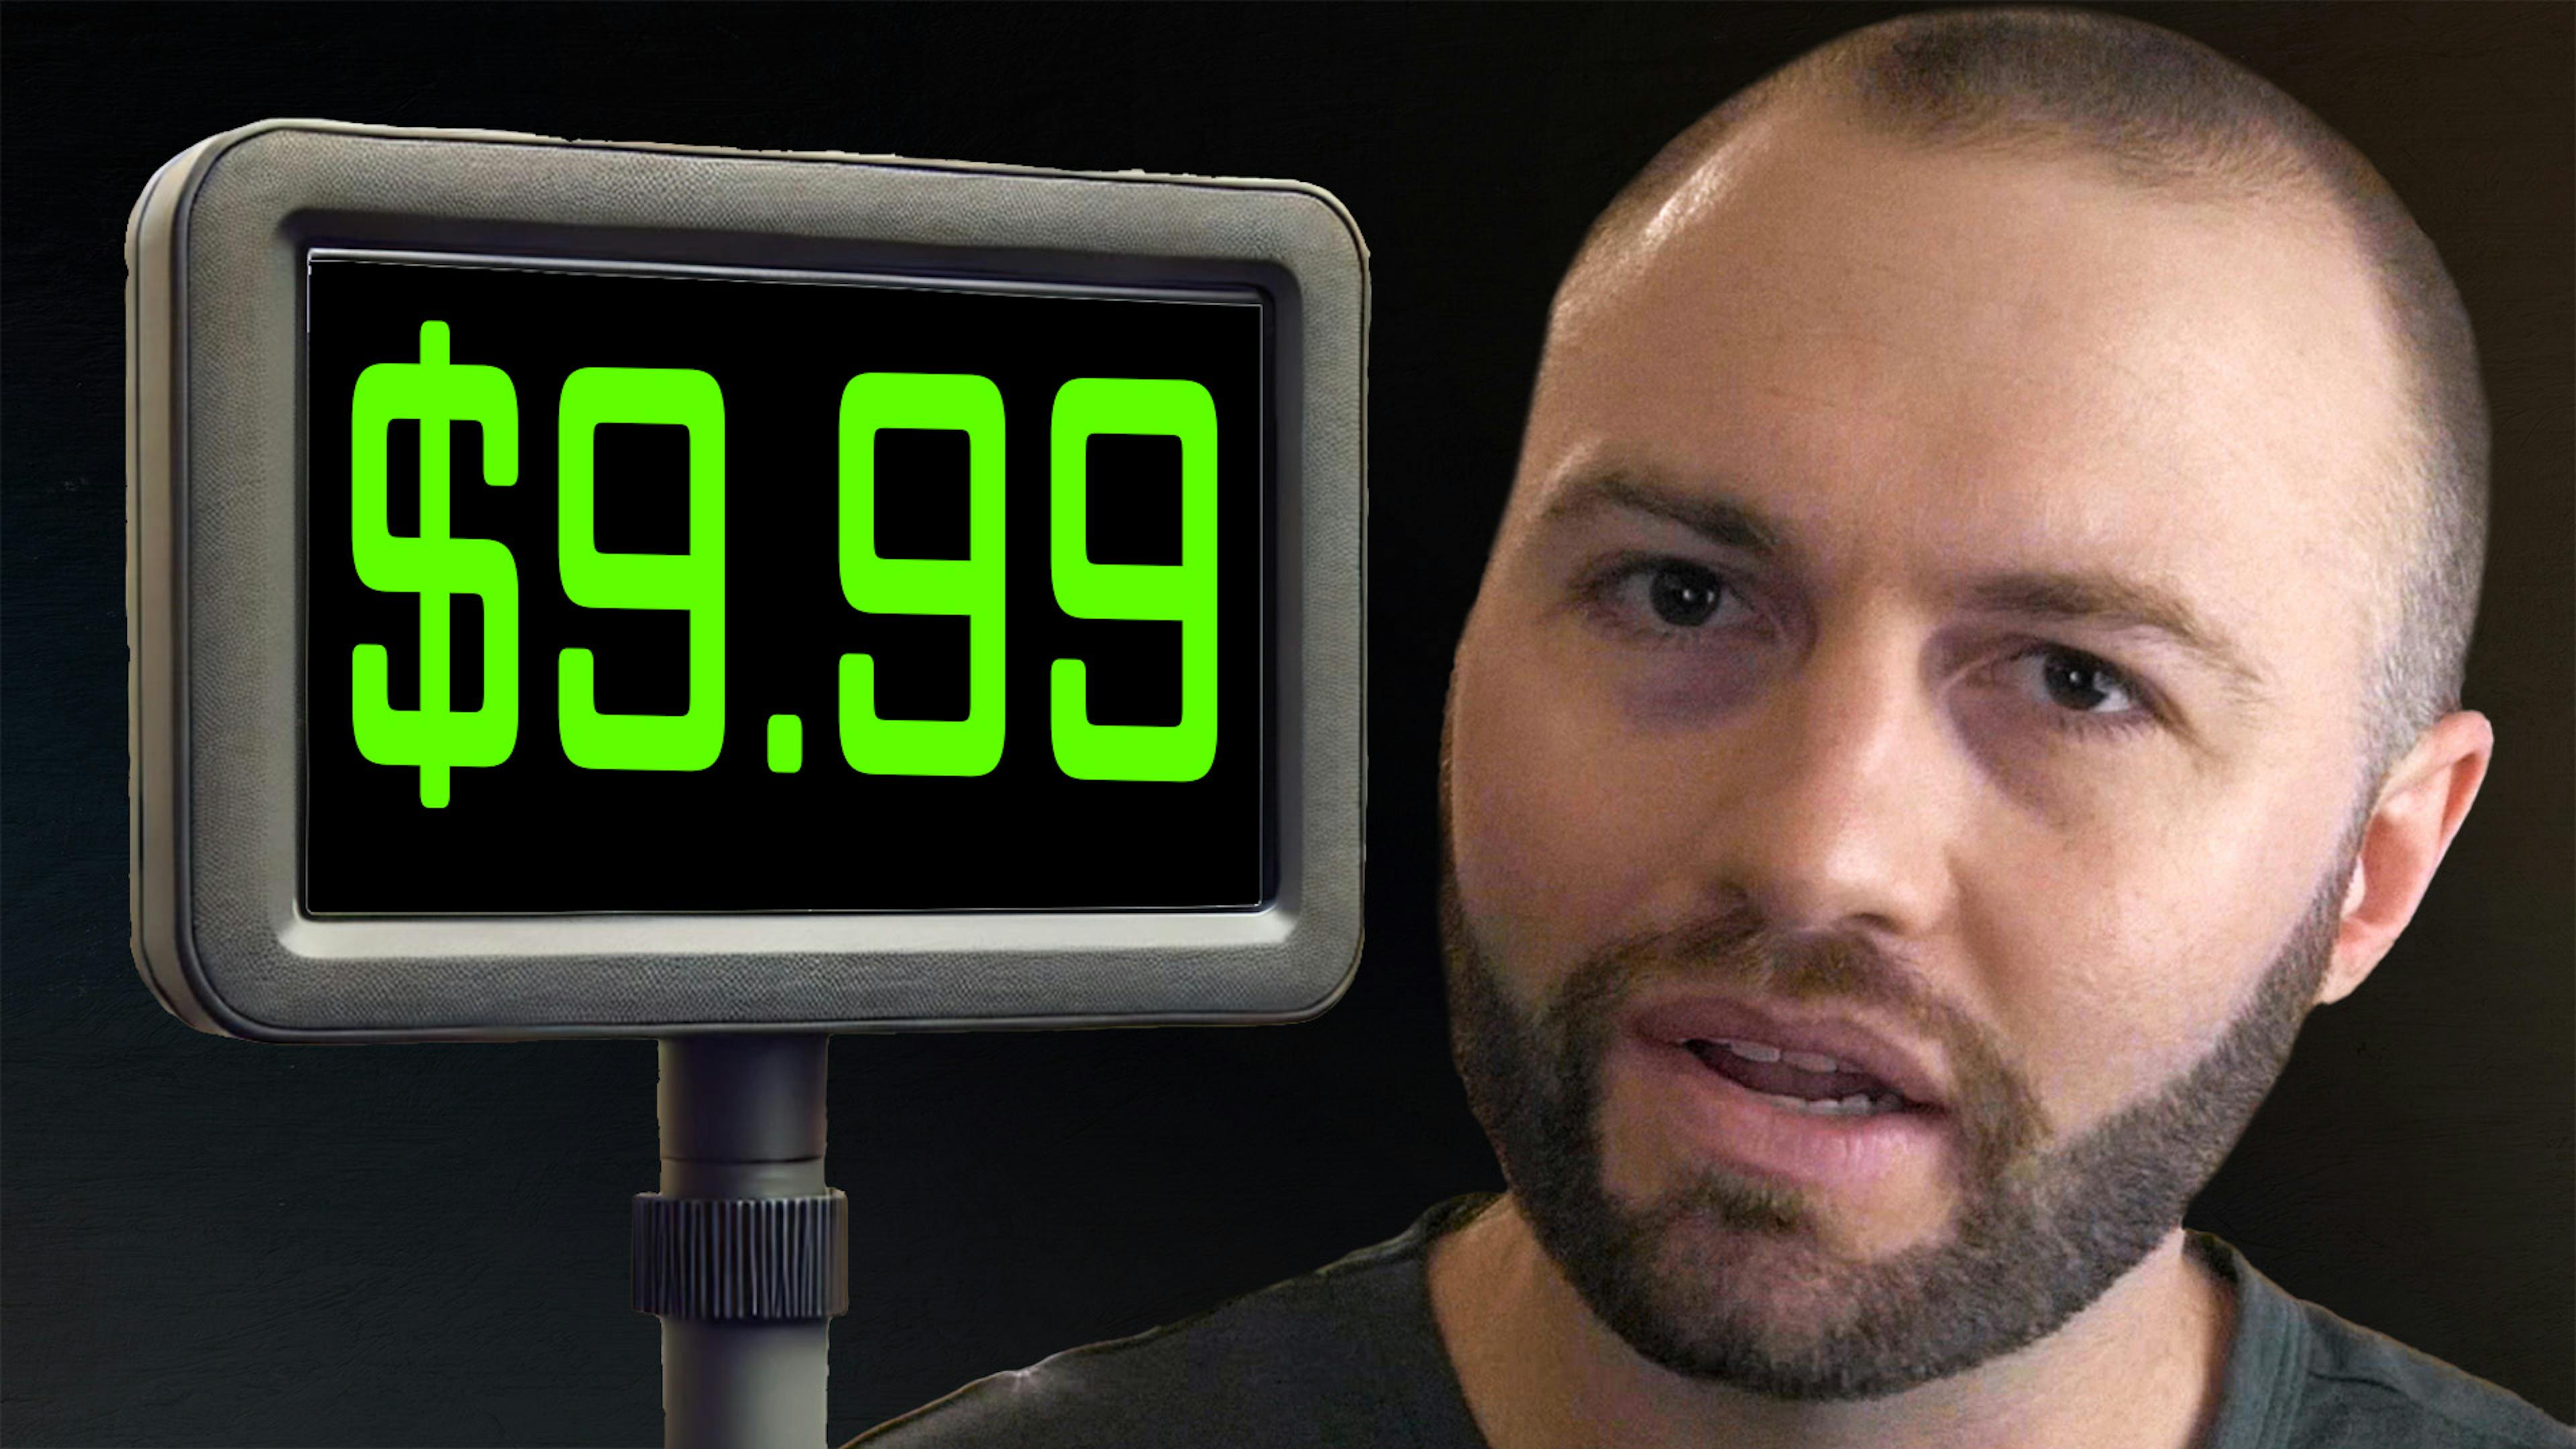 Pricing in Nines Thumbnail